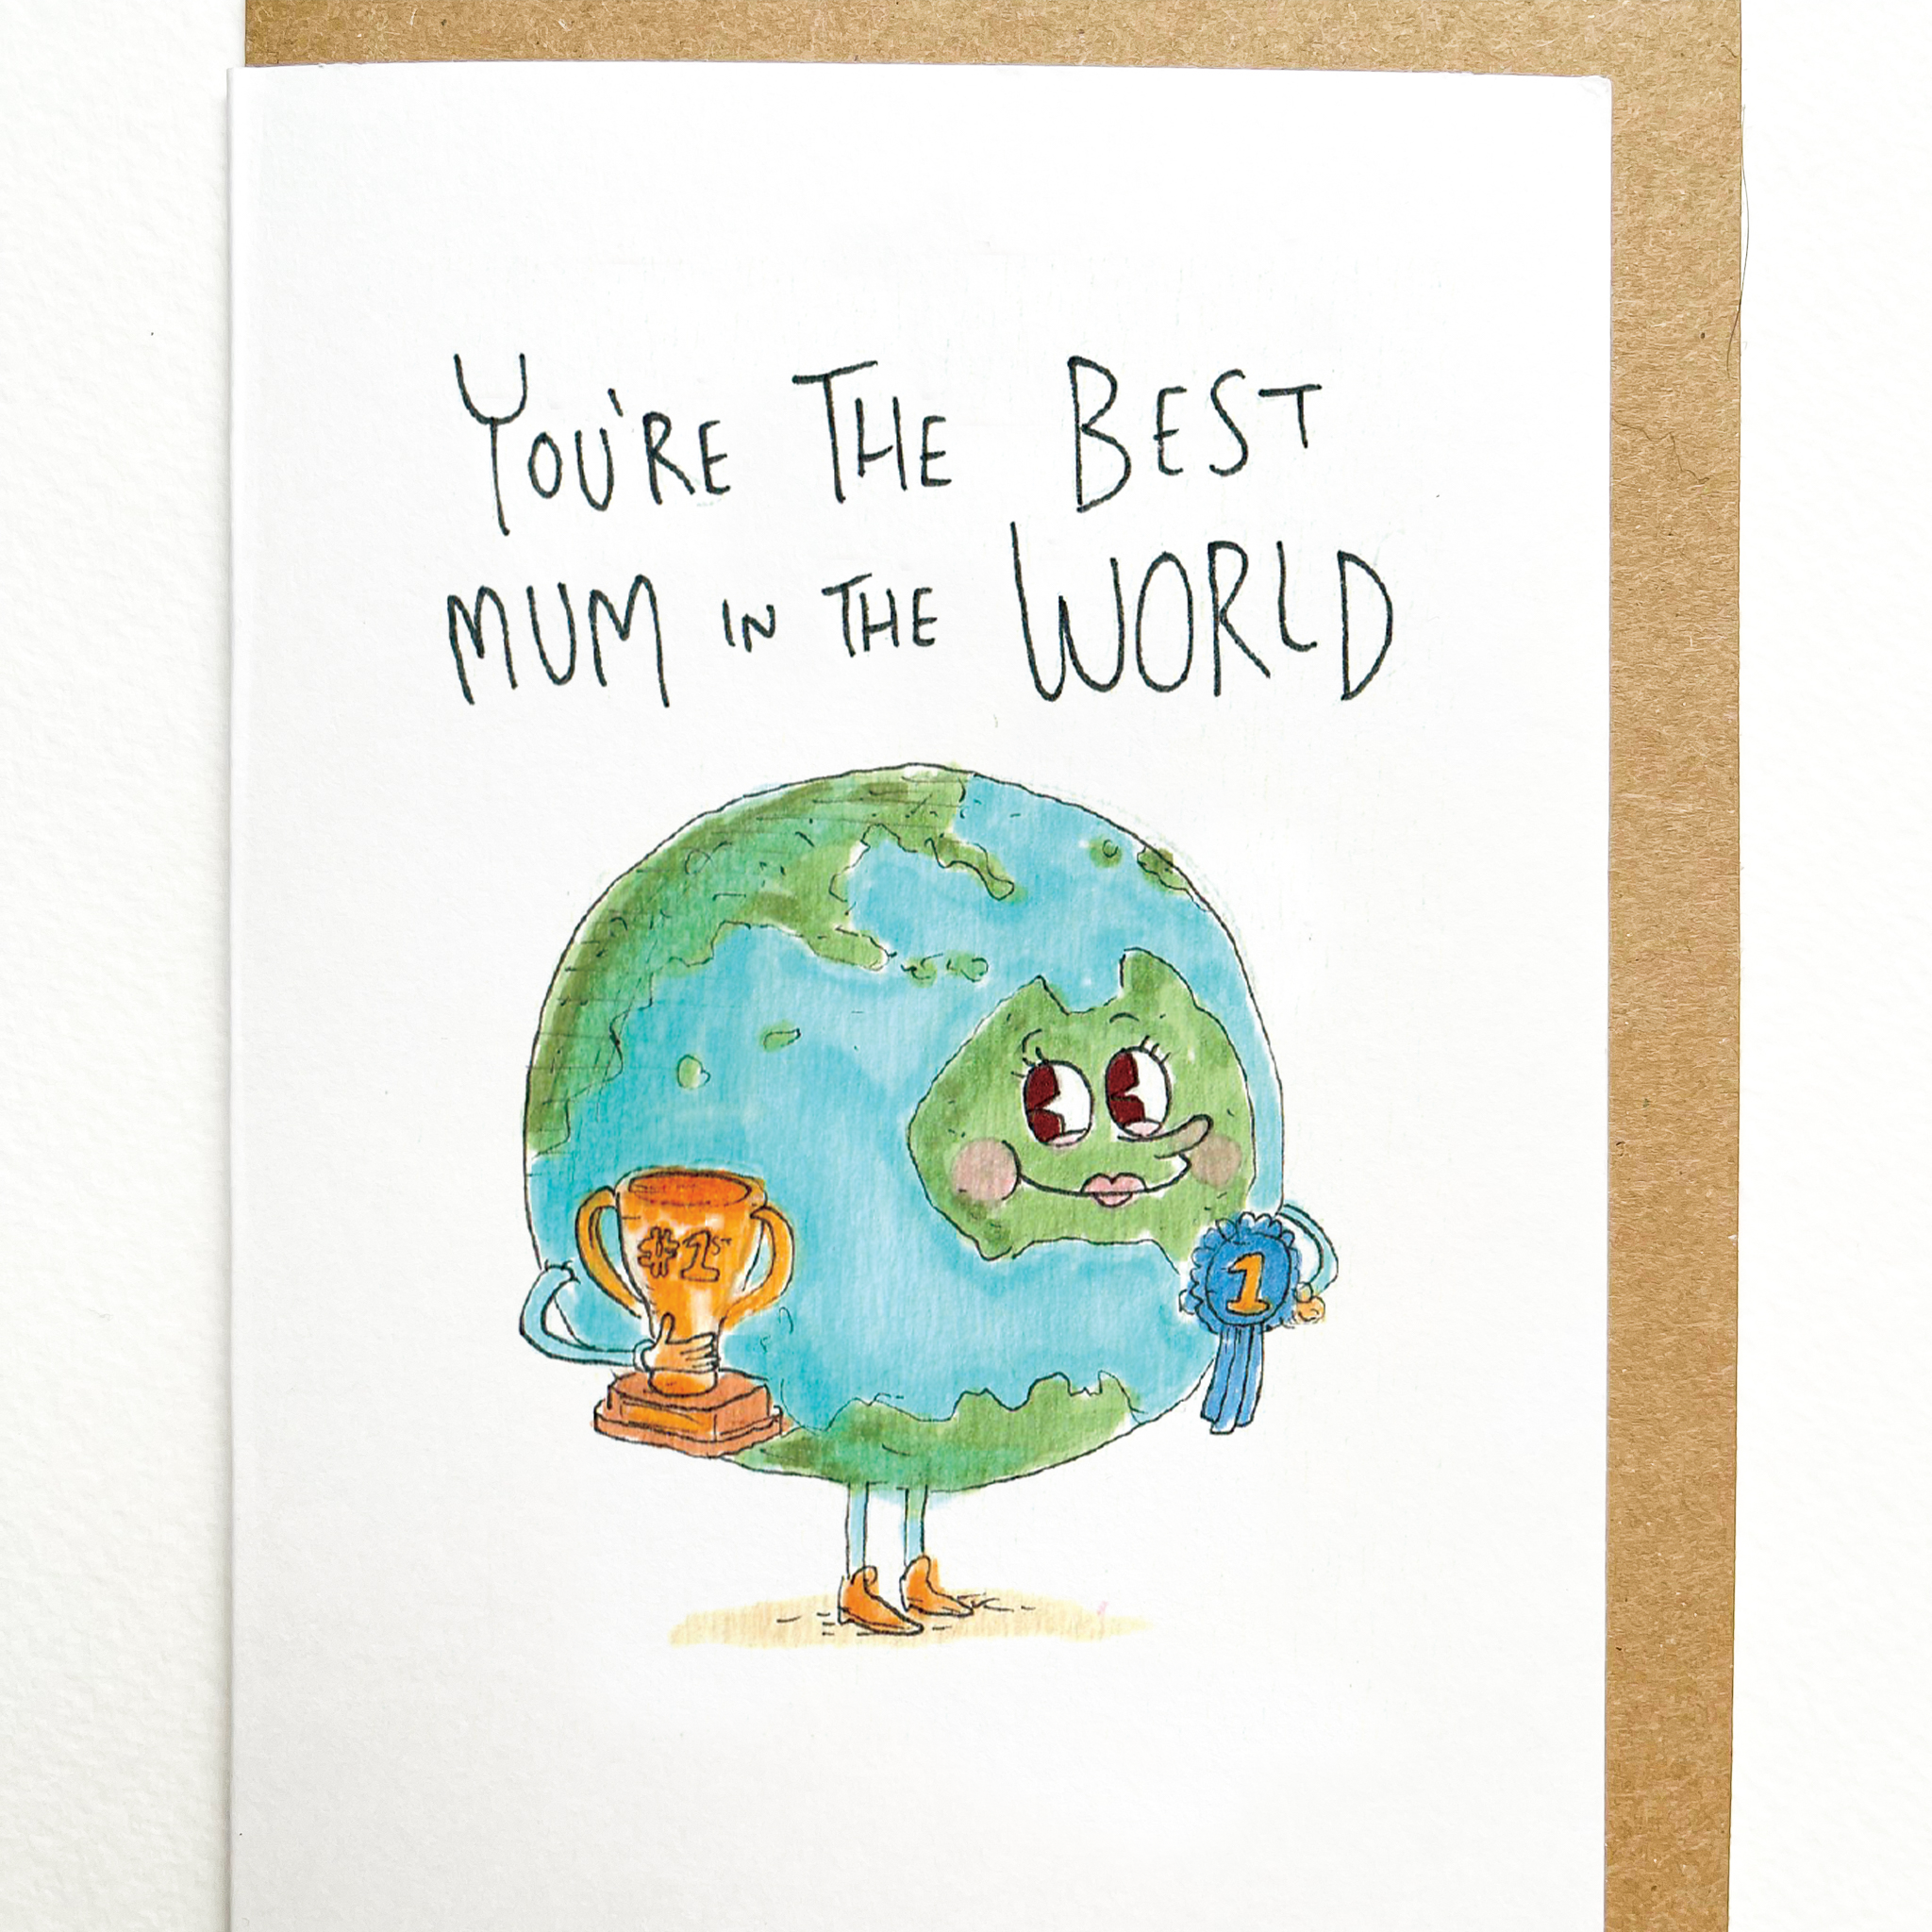 You’re the Best Mum in the World